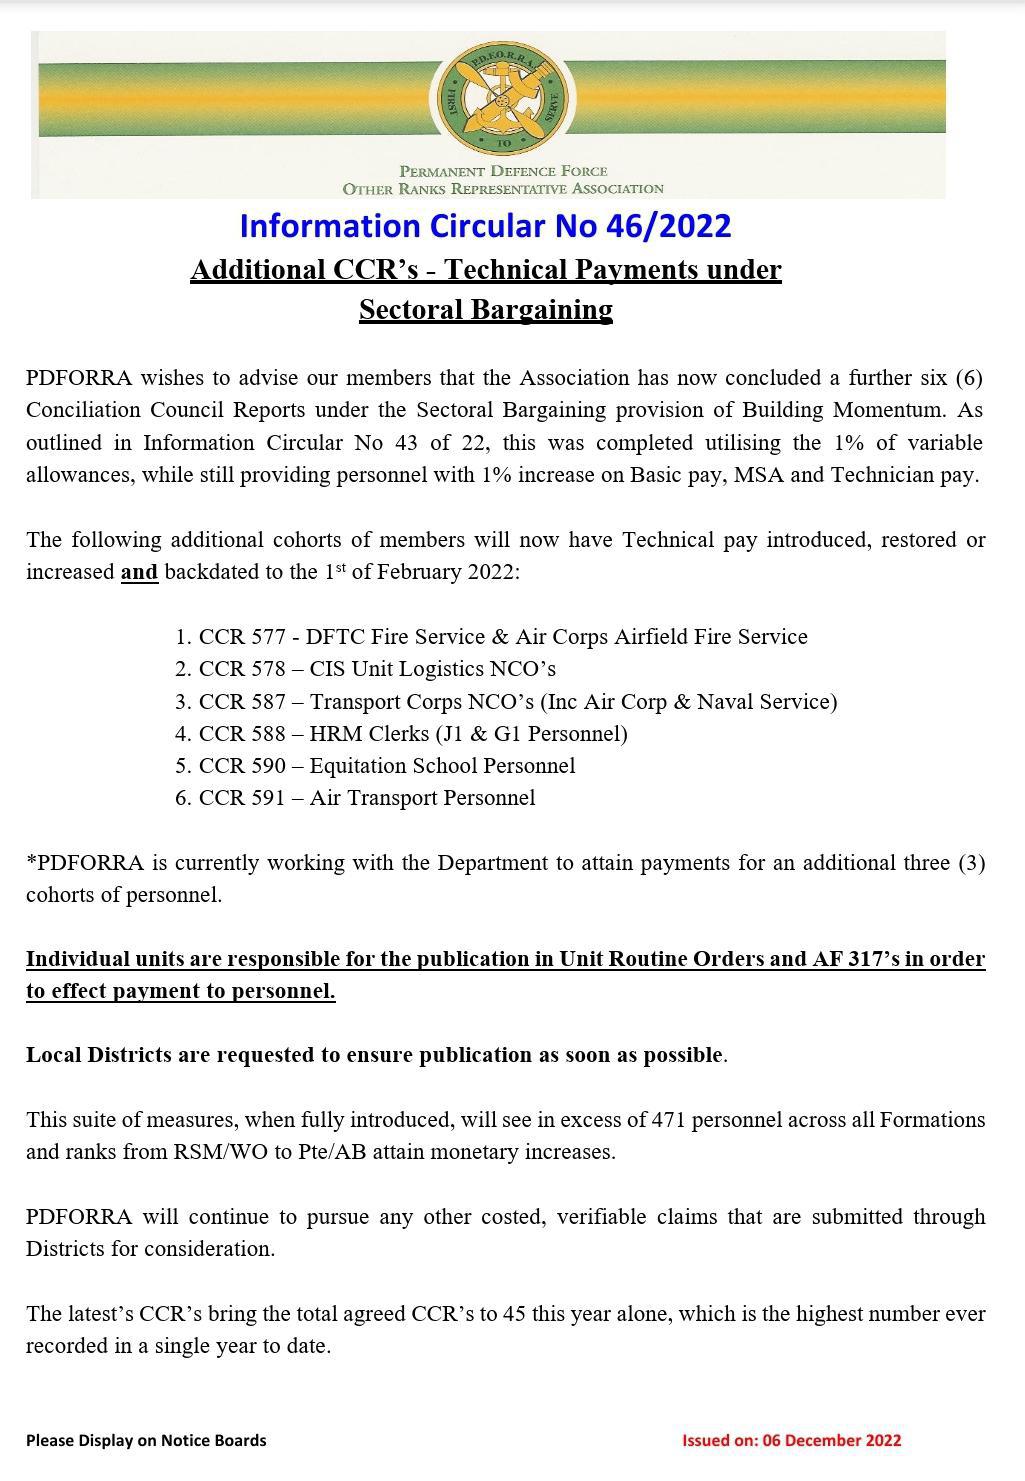 Information Circular No 46 of 22 - Additional CCR's Technical Payments under Sectoral Bargaining